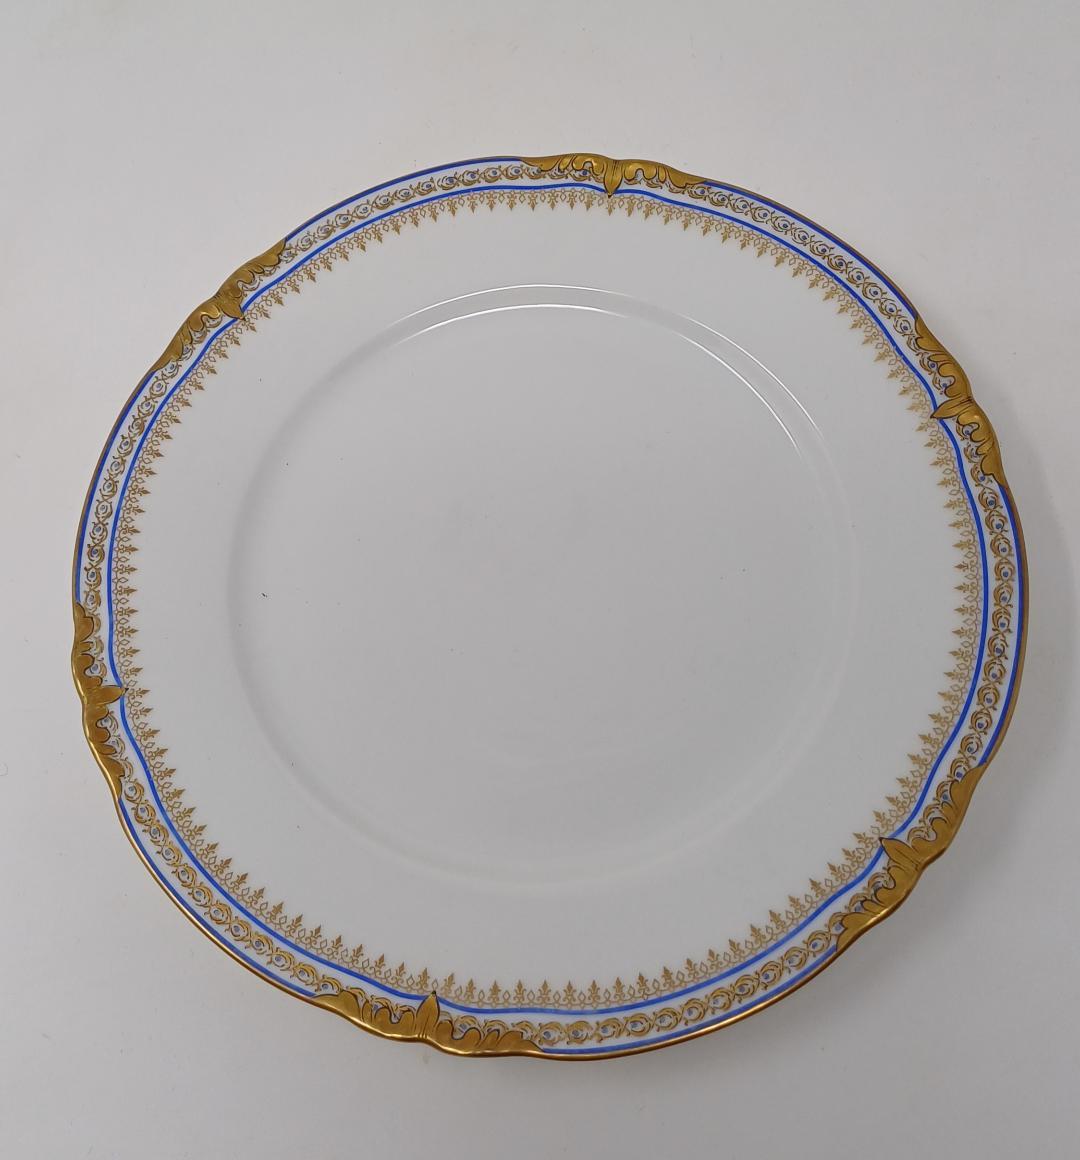 Early 20th century Limoges porcelain very large dinner service by Balleroy Freres (1912-1937, Balleroy Freres won a Silver medal at the 1925 Paris Exposition).
)The service concists of: 
58 Dinner Plates (diameter 25 cm)
22 Soup Plates  (diameter 25